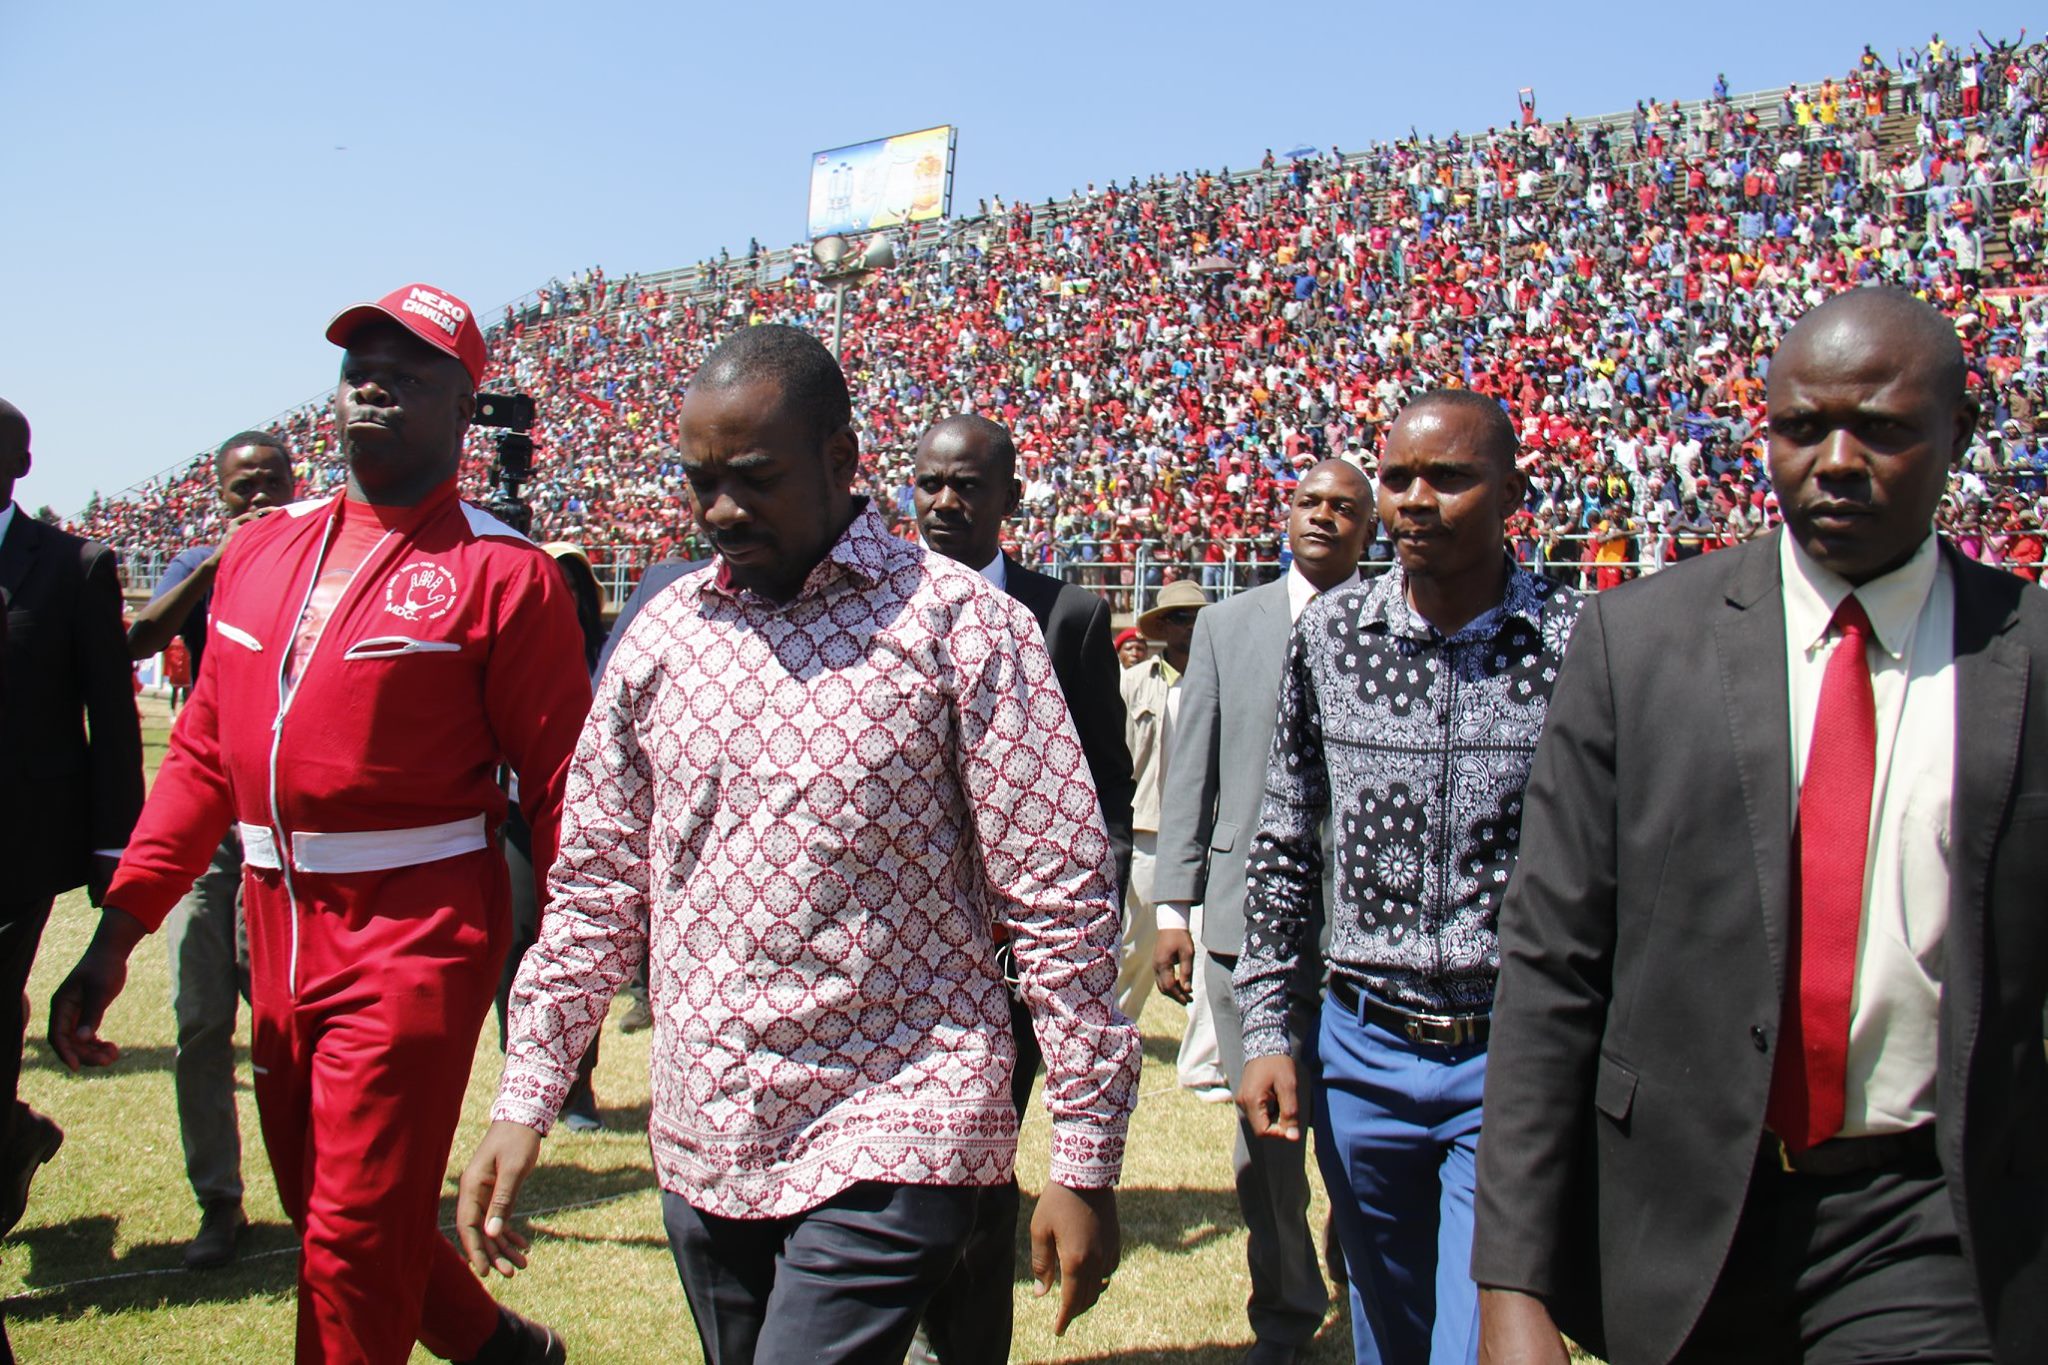  'Change is coming,' says Chamisa